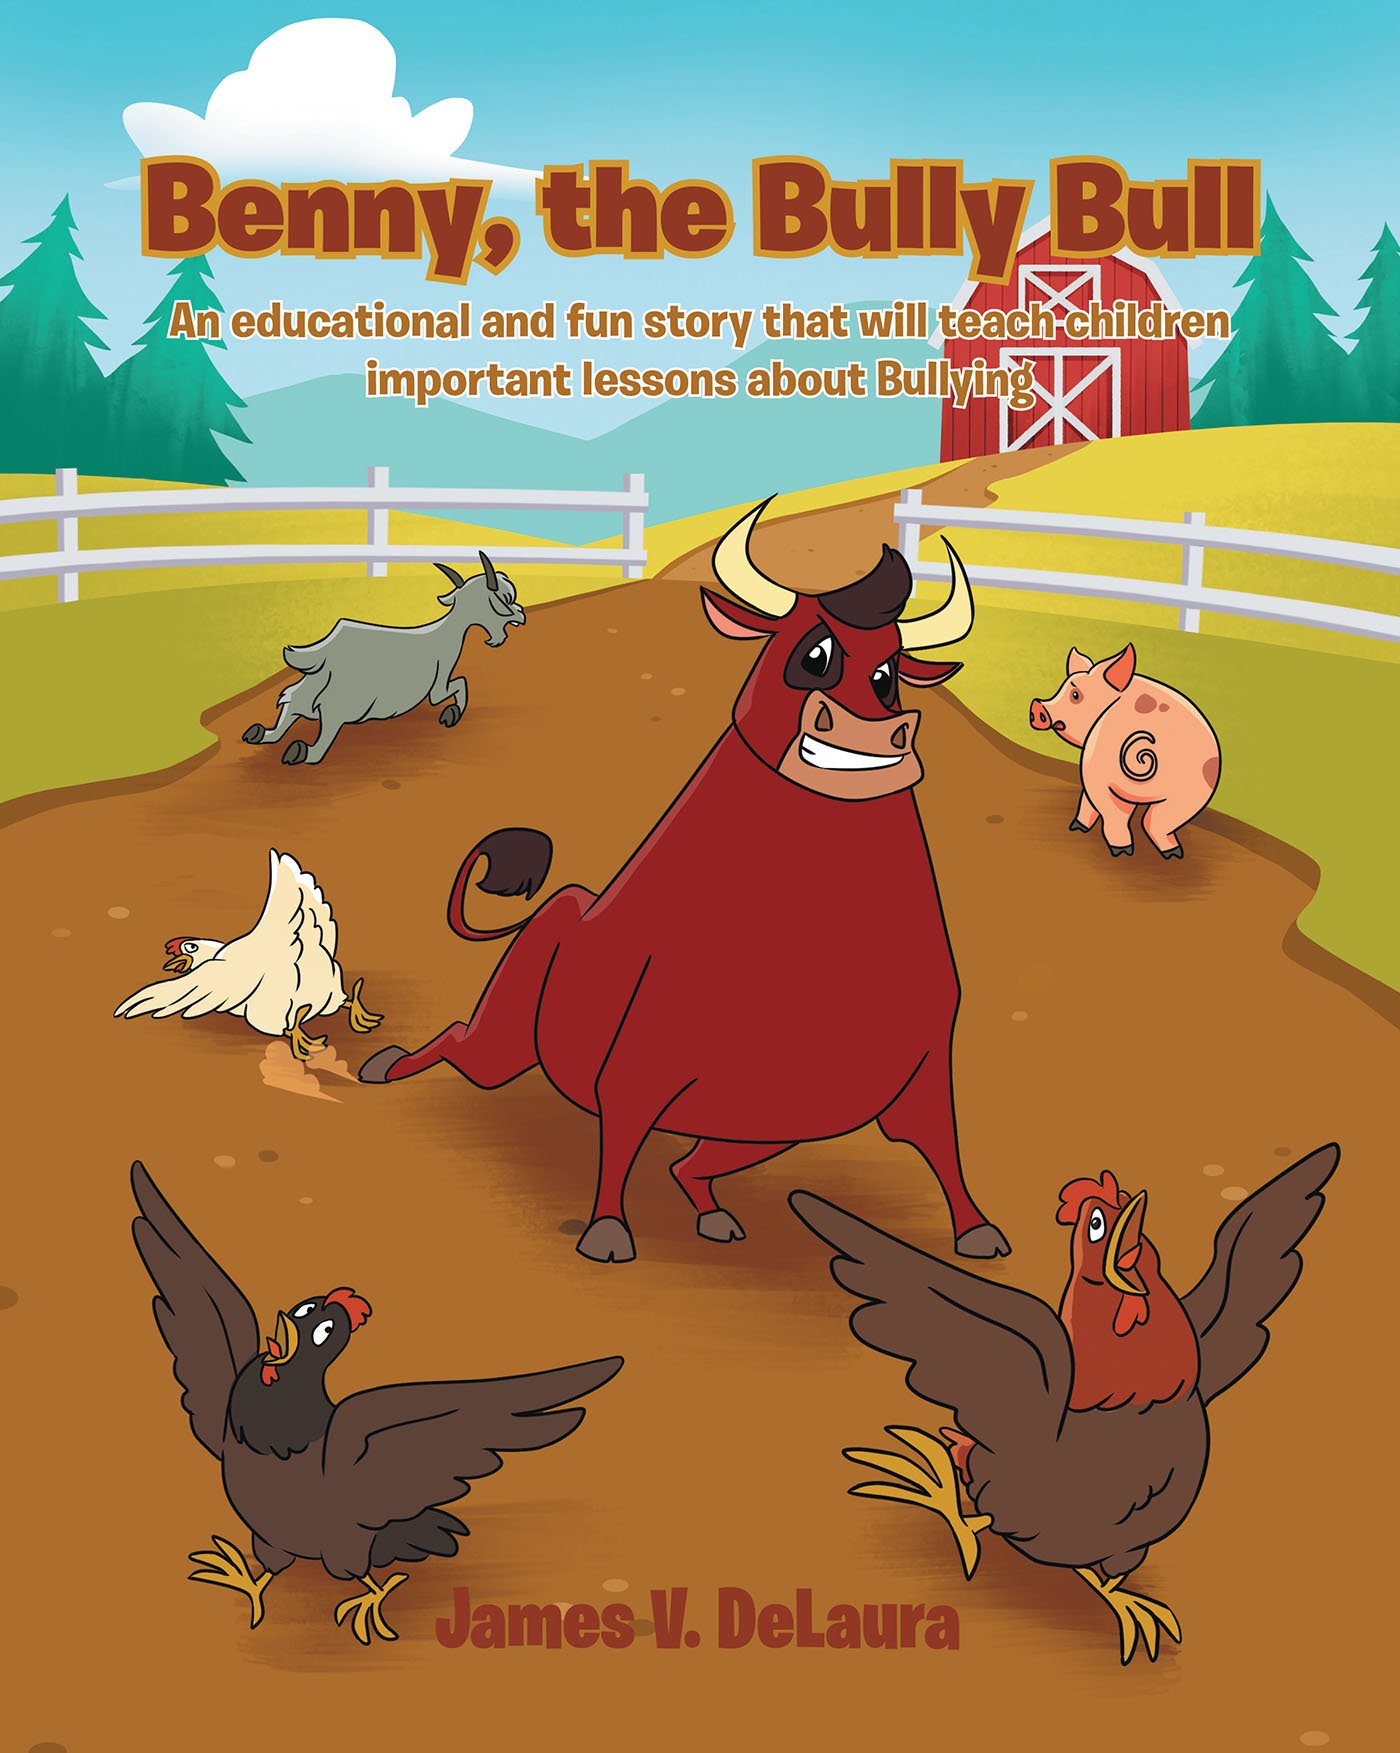 James V. DeLaura’s Newly Released “Benny, the Bully Bull” is an Educational Narrative That Aids in Teaching Positive Responses to Bullying Behavior